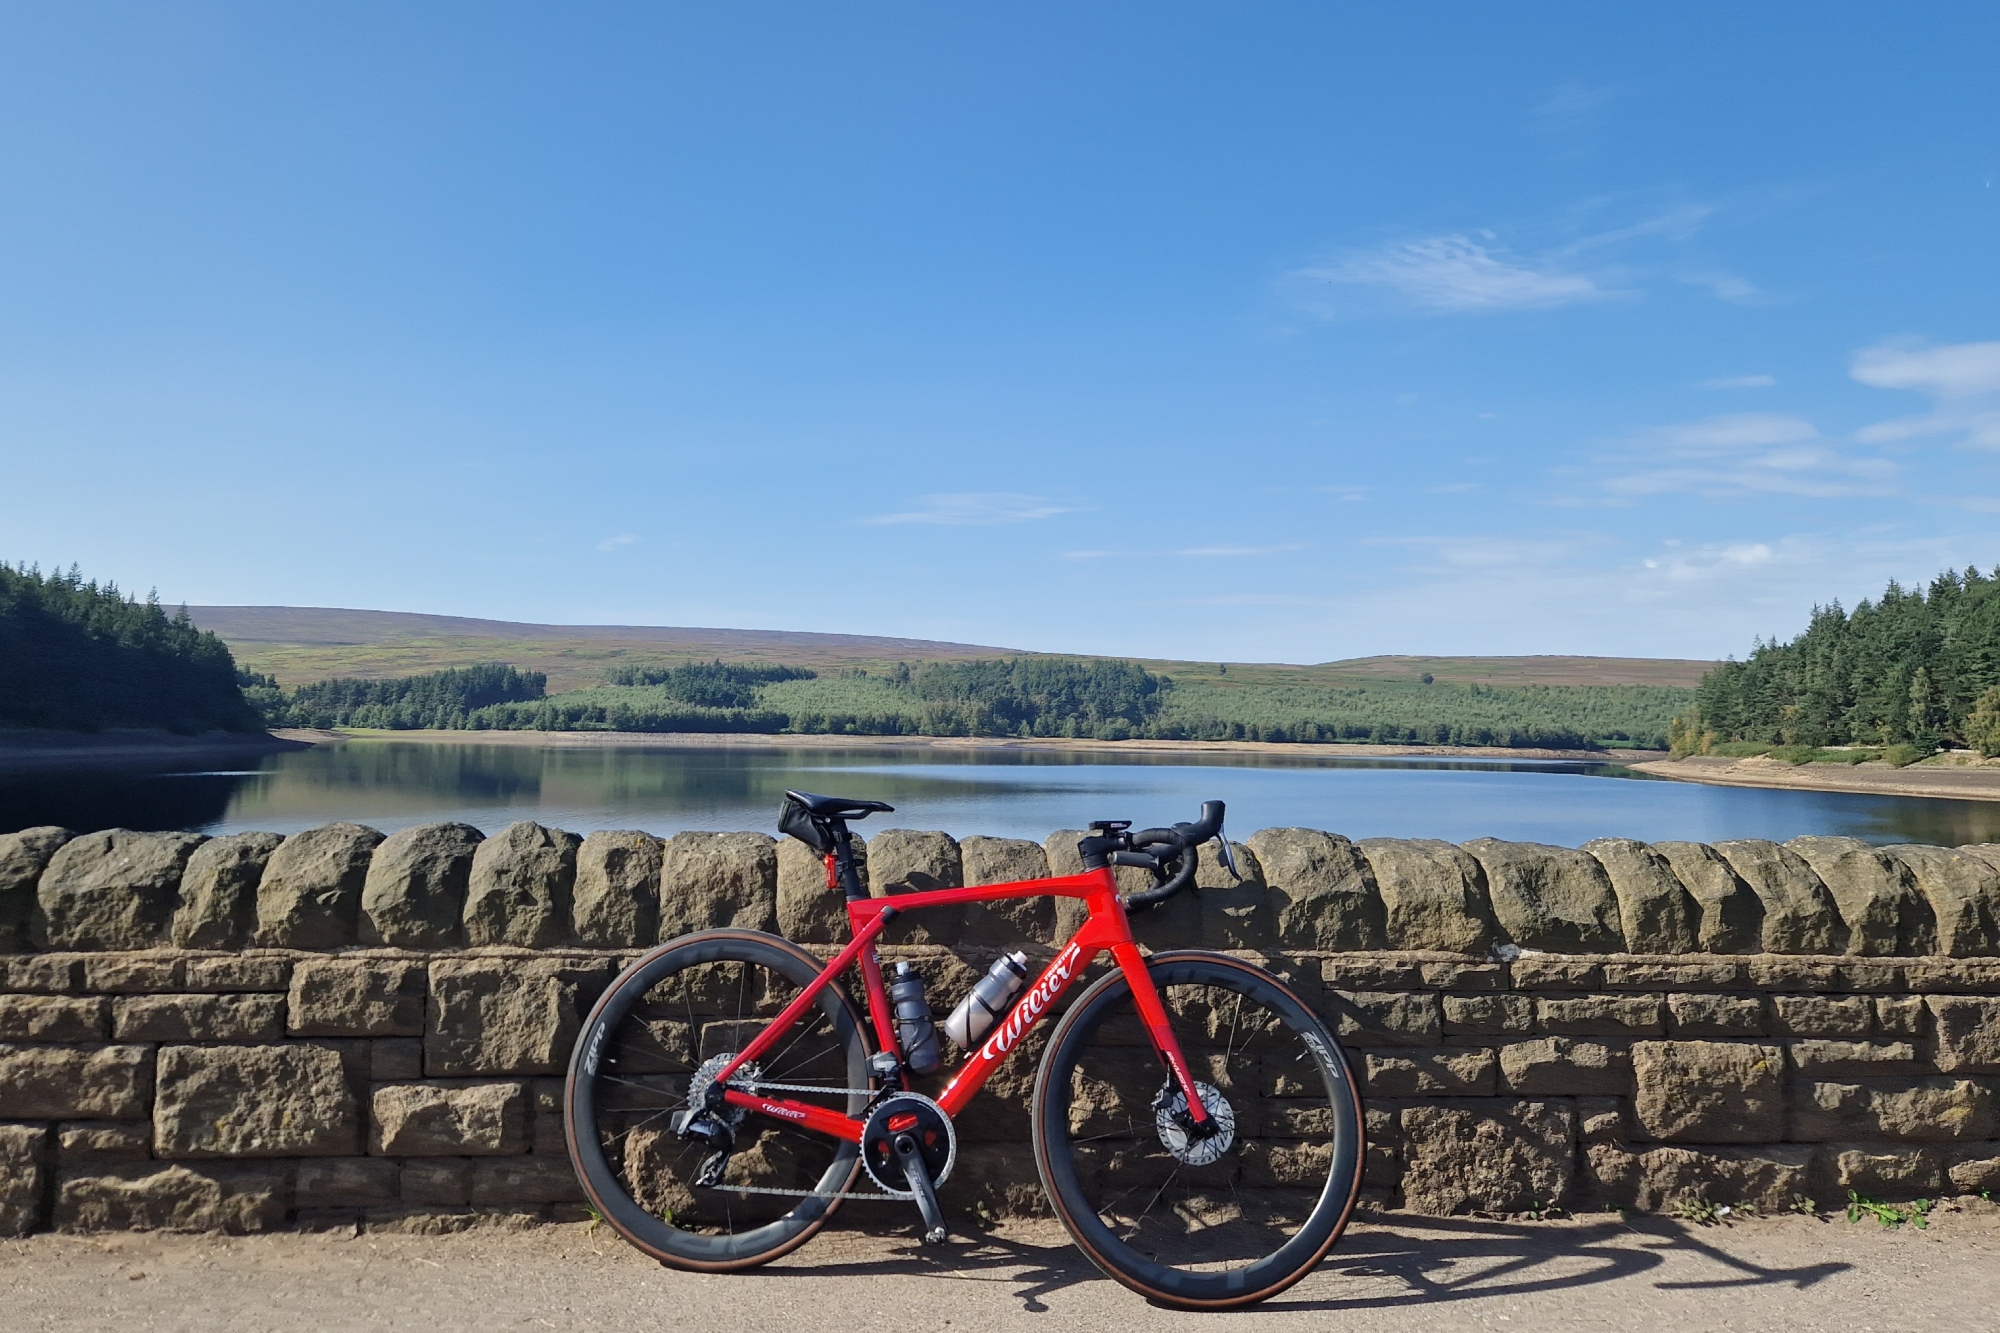 The Wilier Granturismo SLR leaning against a stone wall in front of a reservoir with hills and blue sky in the background